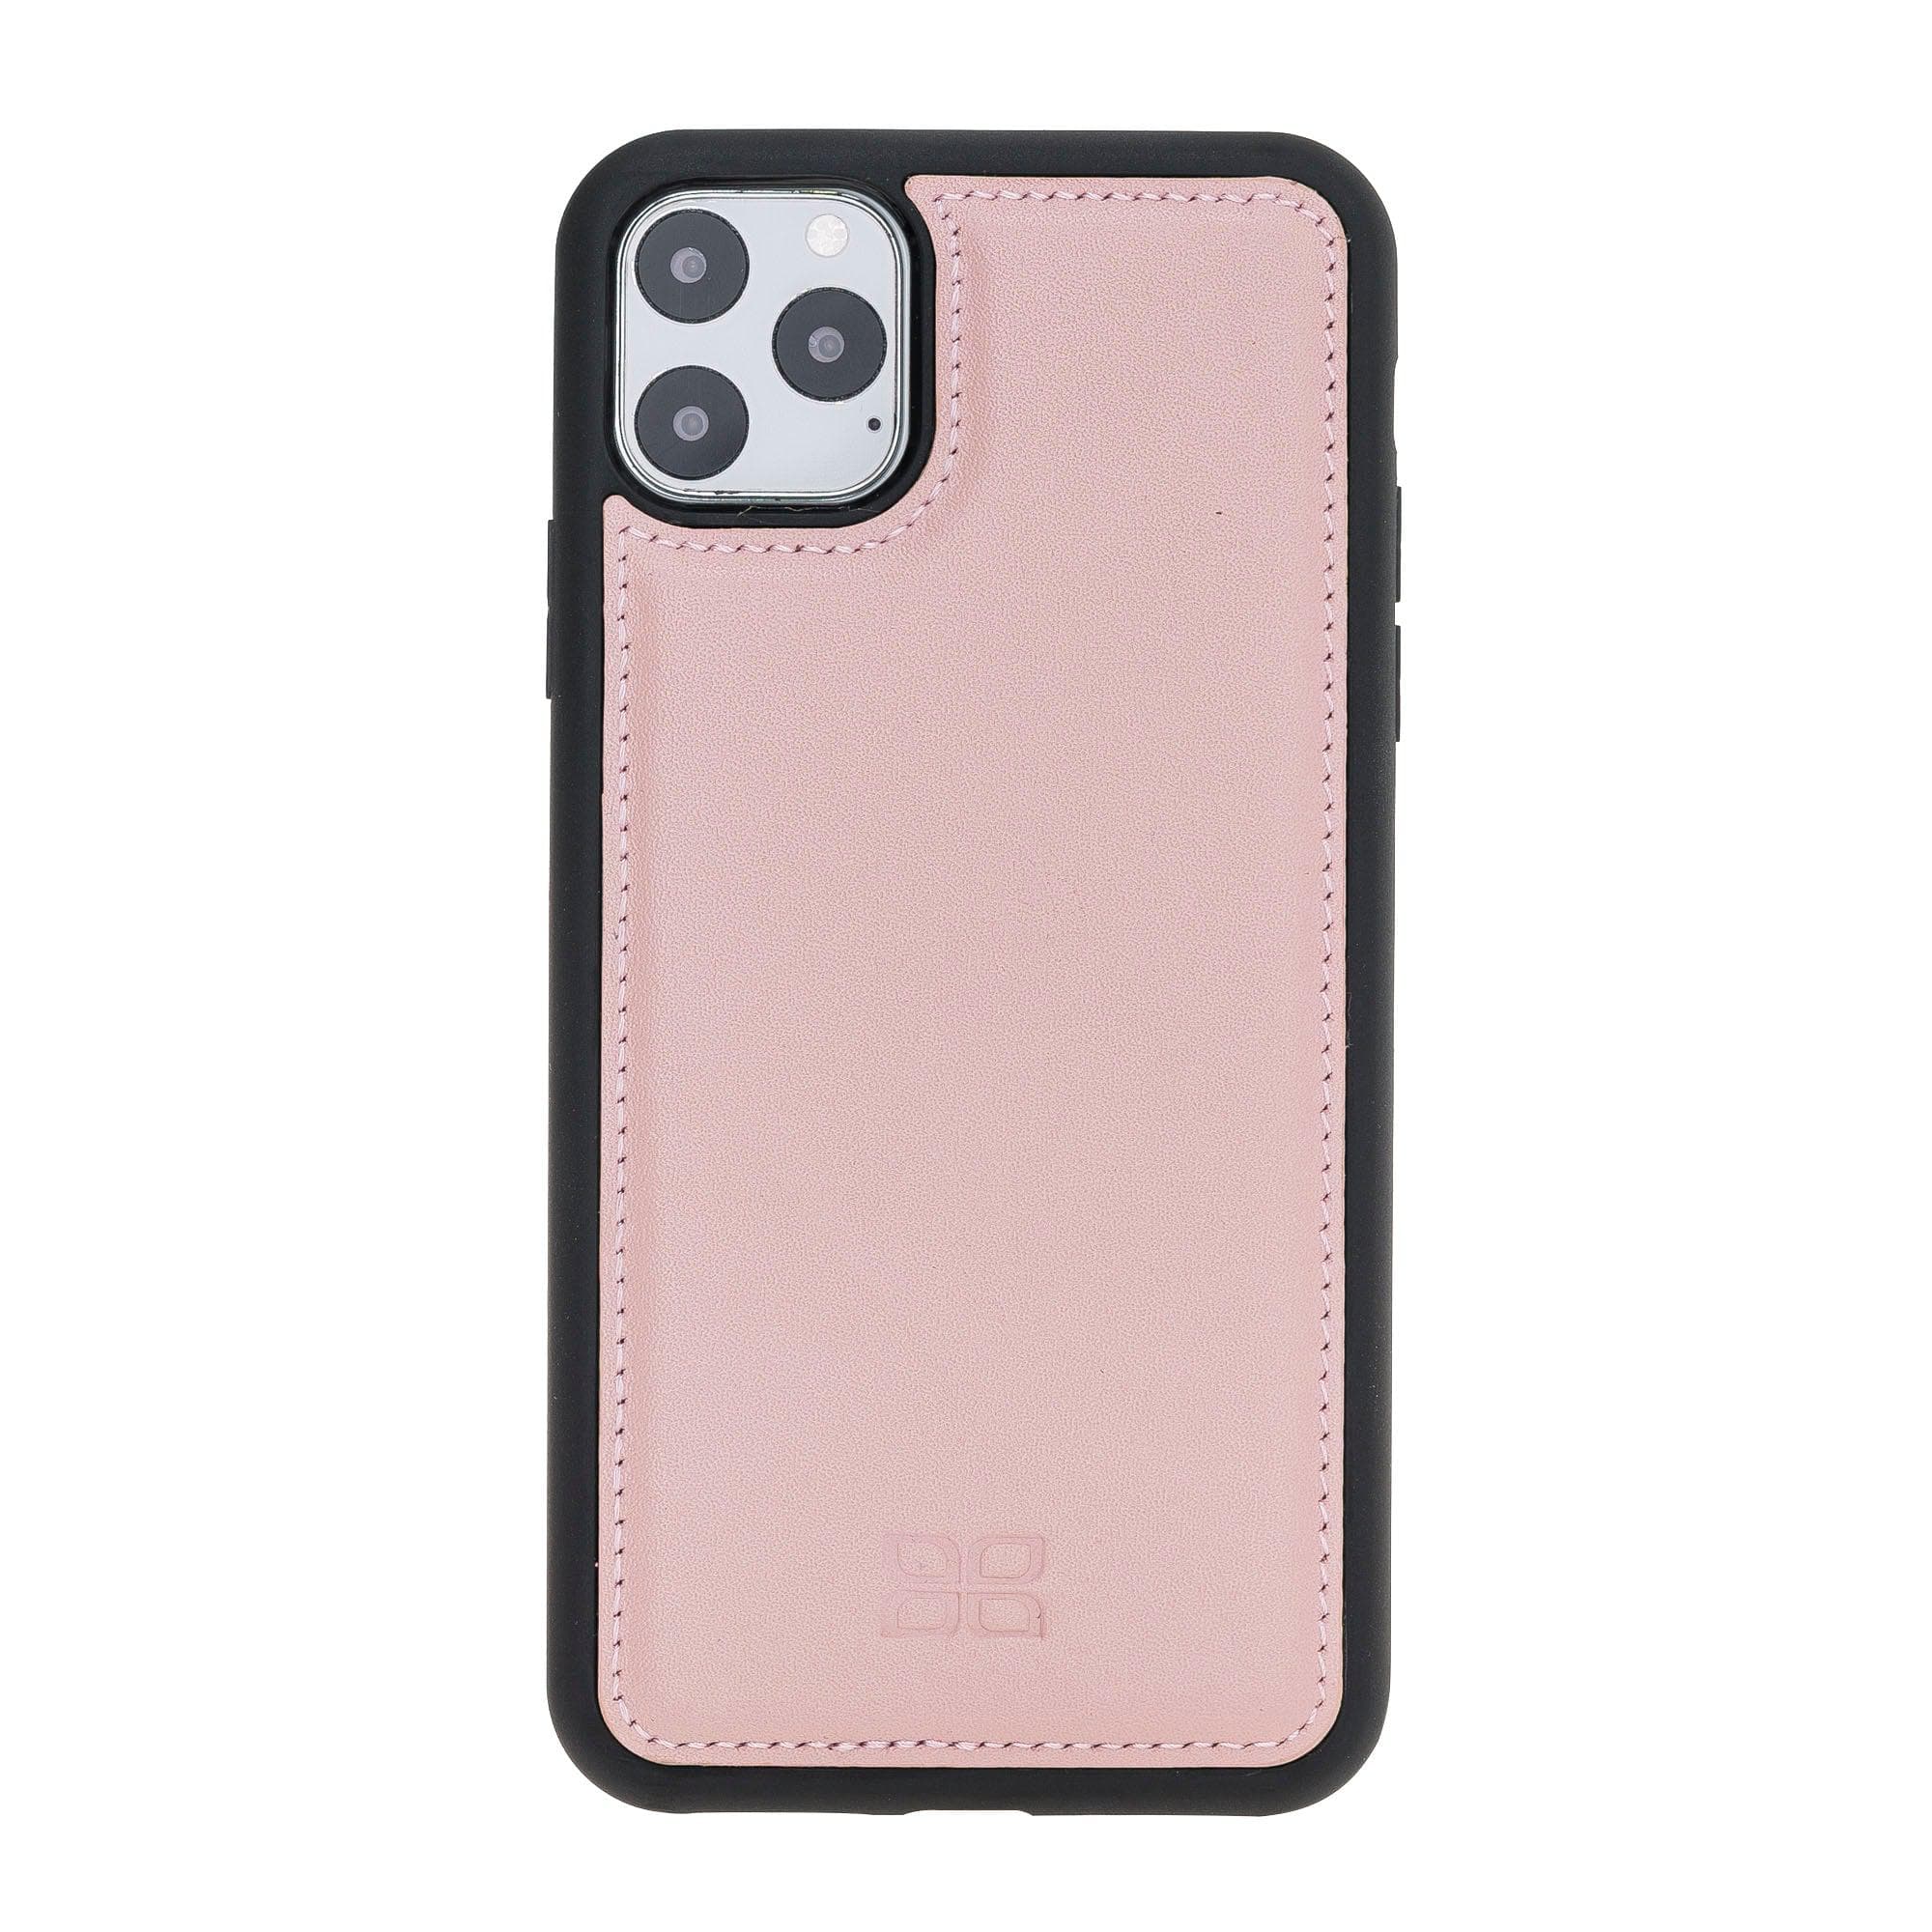 Mobile Phone Cases Flex Cover Leather Back Cover Case for Apple iPhone 11 Series Bouletta Shop